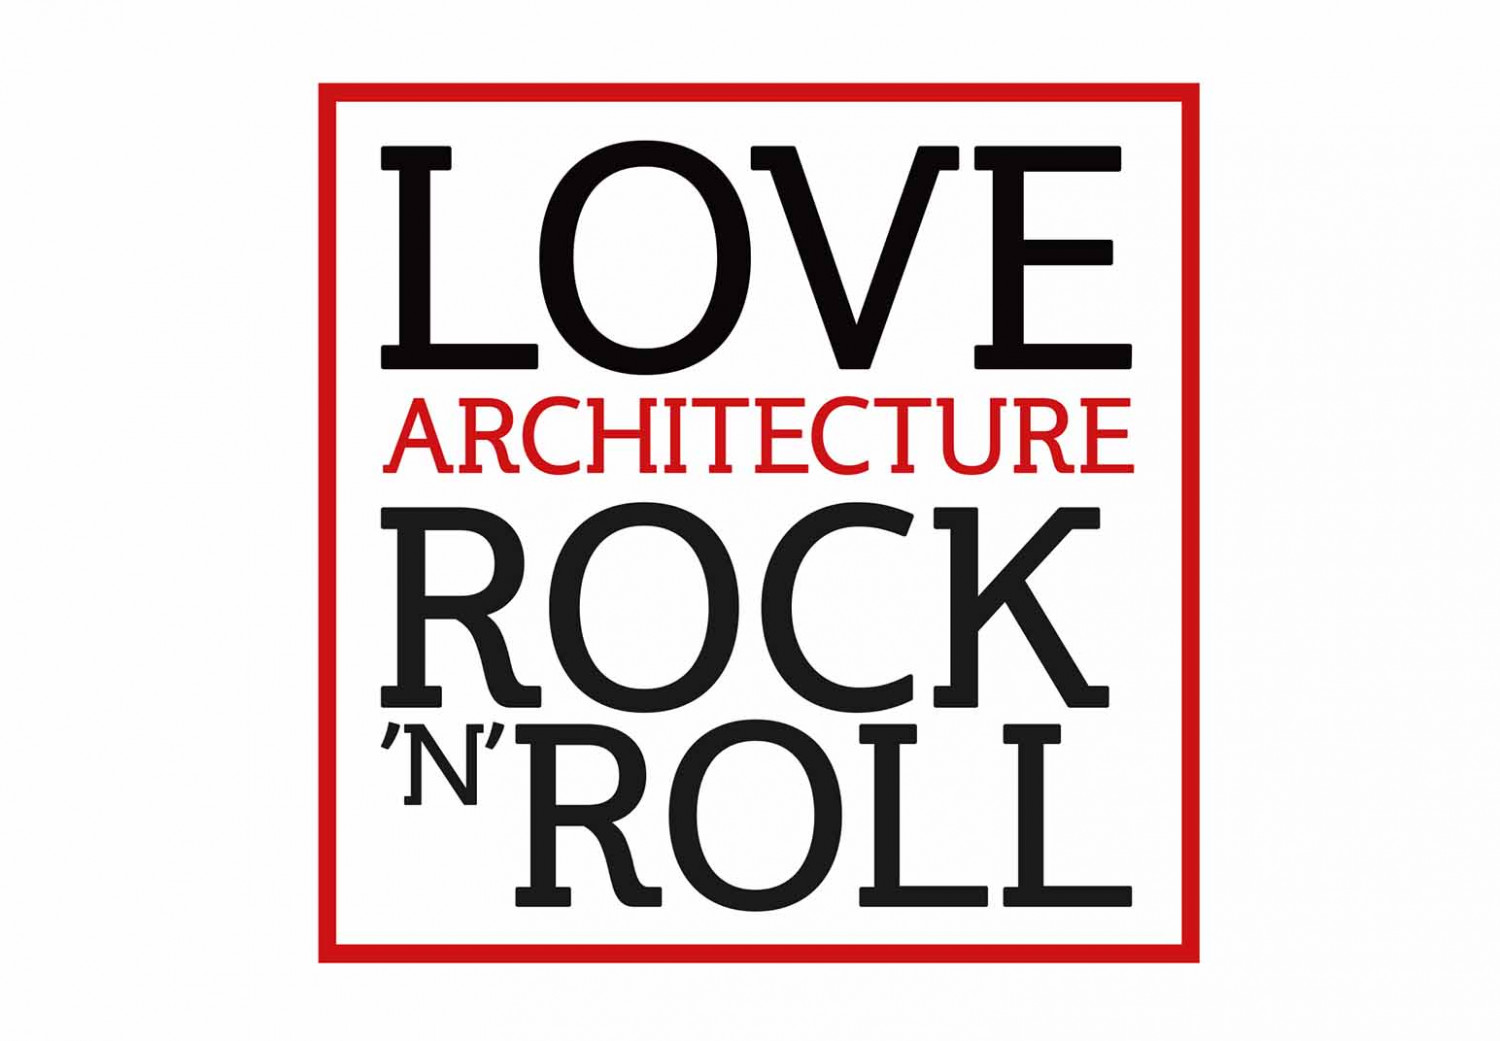 Love, architecture, rock 'n' roll